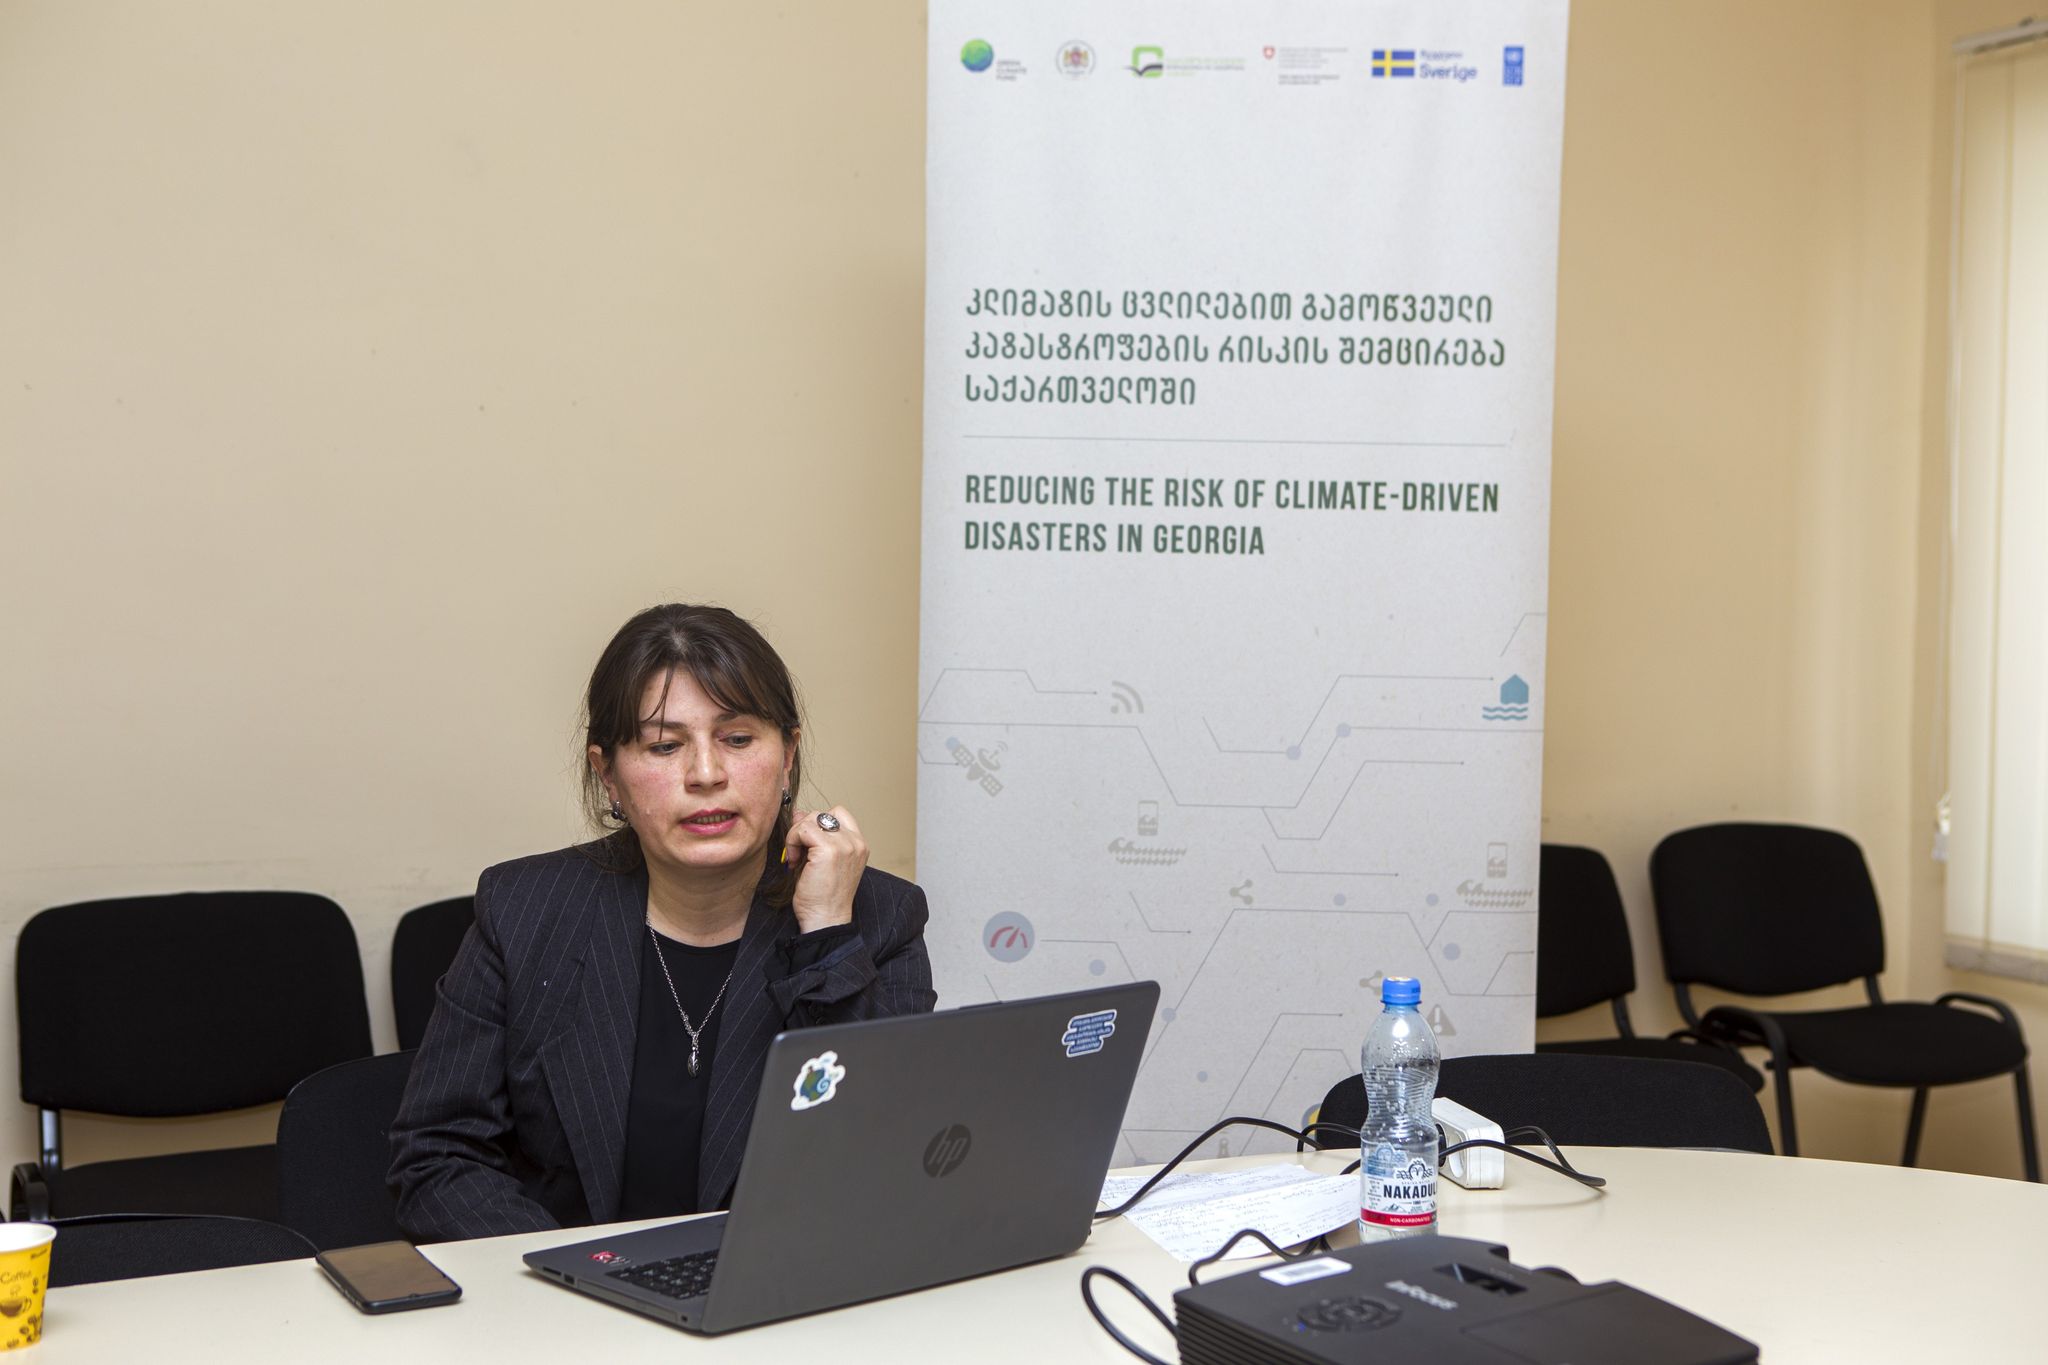 Within the framework of the project "Reducing the Risk of Climate Driven Disasters", information meetings were held with the mayors and chairmen of the target municipalities